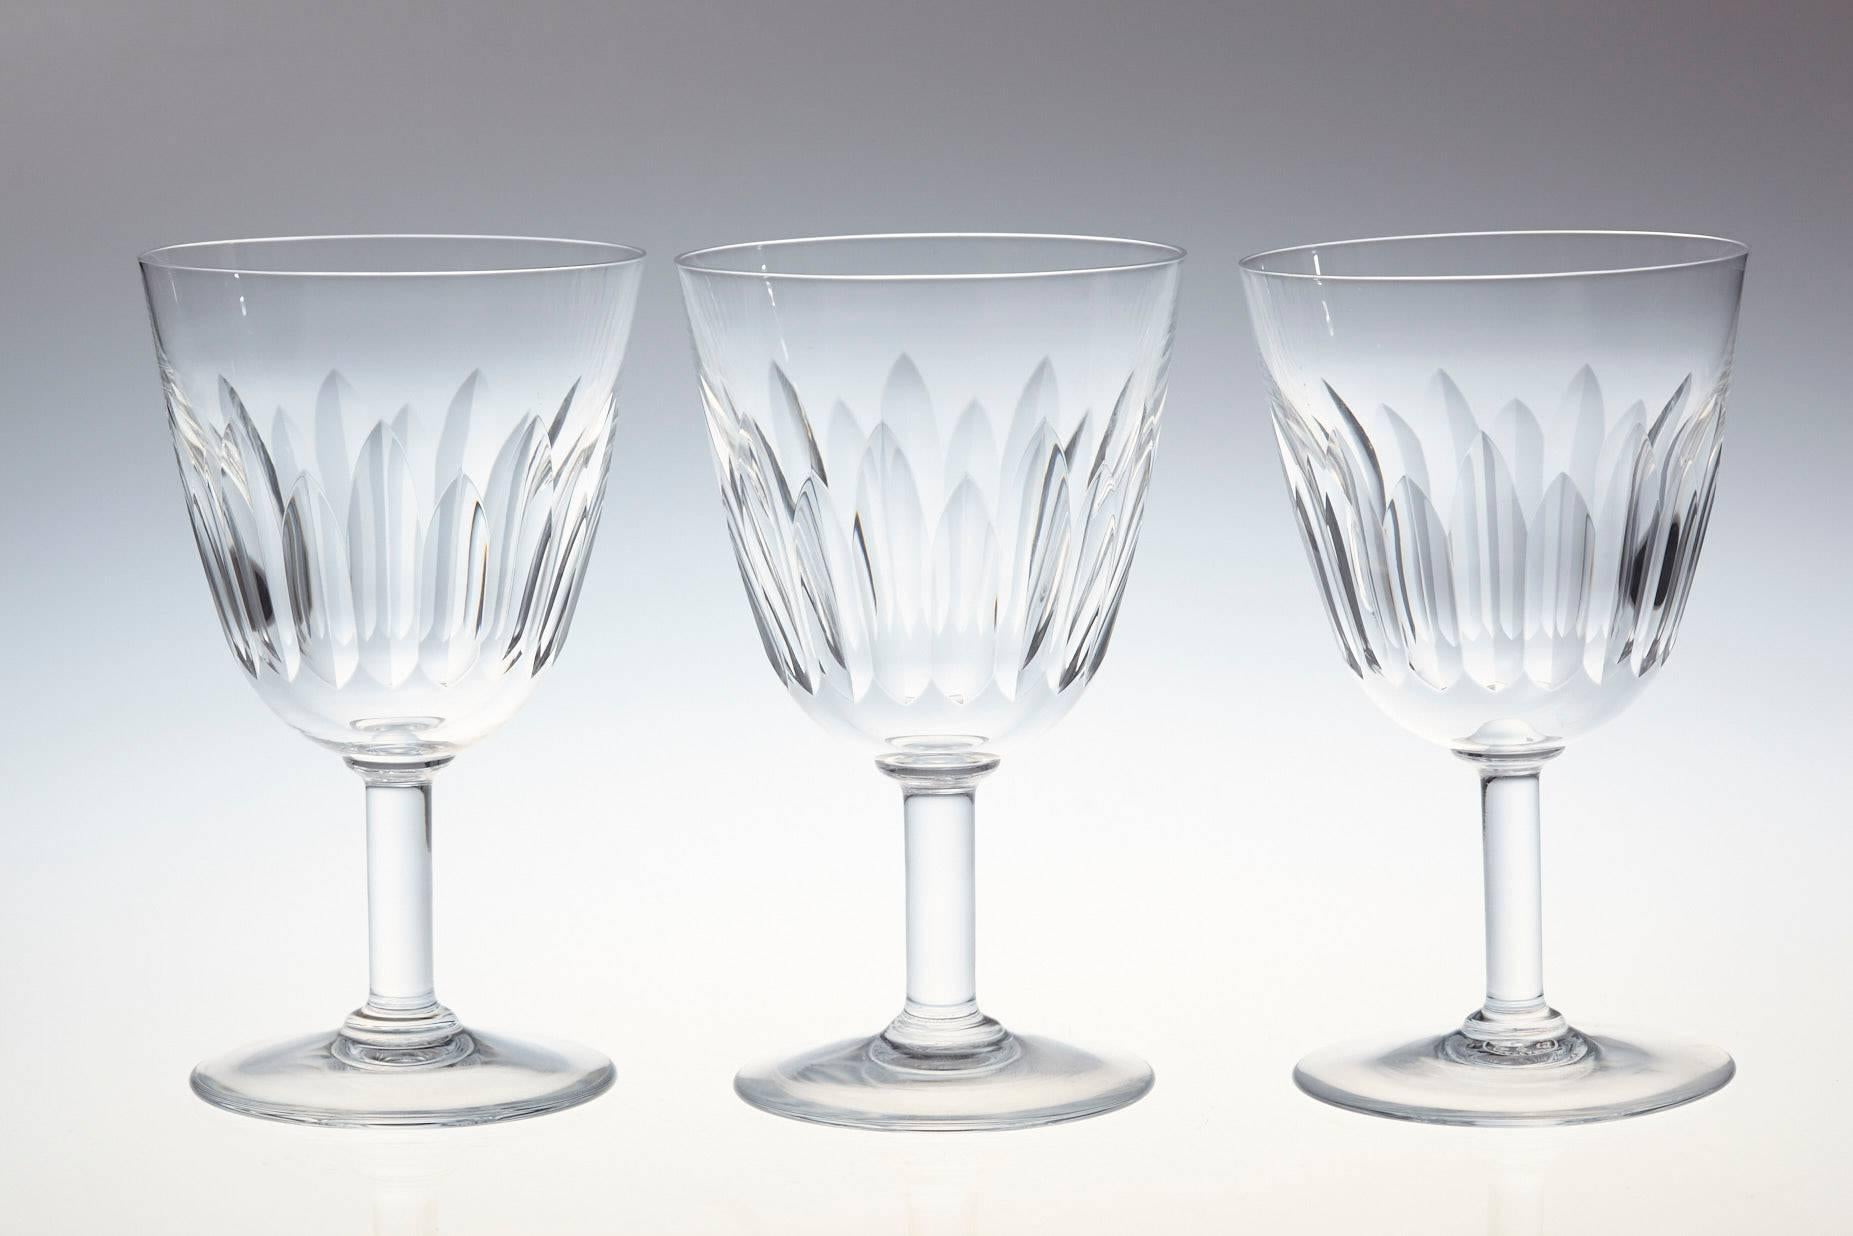 Rare set of six Baccarat crystal red wine glasses in the 'Lorraine' pattern. The glasses are in a vertical cut bowl form with a round stem. 
This pattern was manufactured between 1953-1978. 
The glasses are in a very good condition.